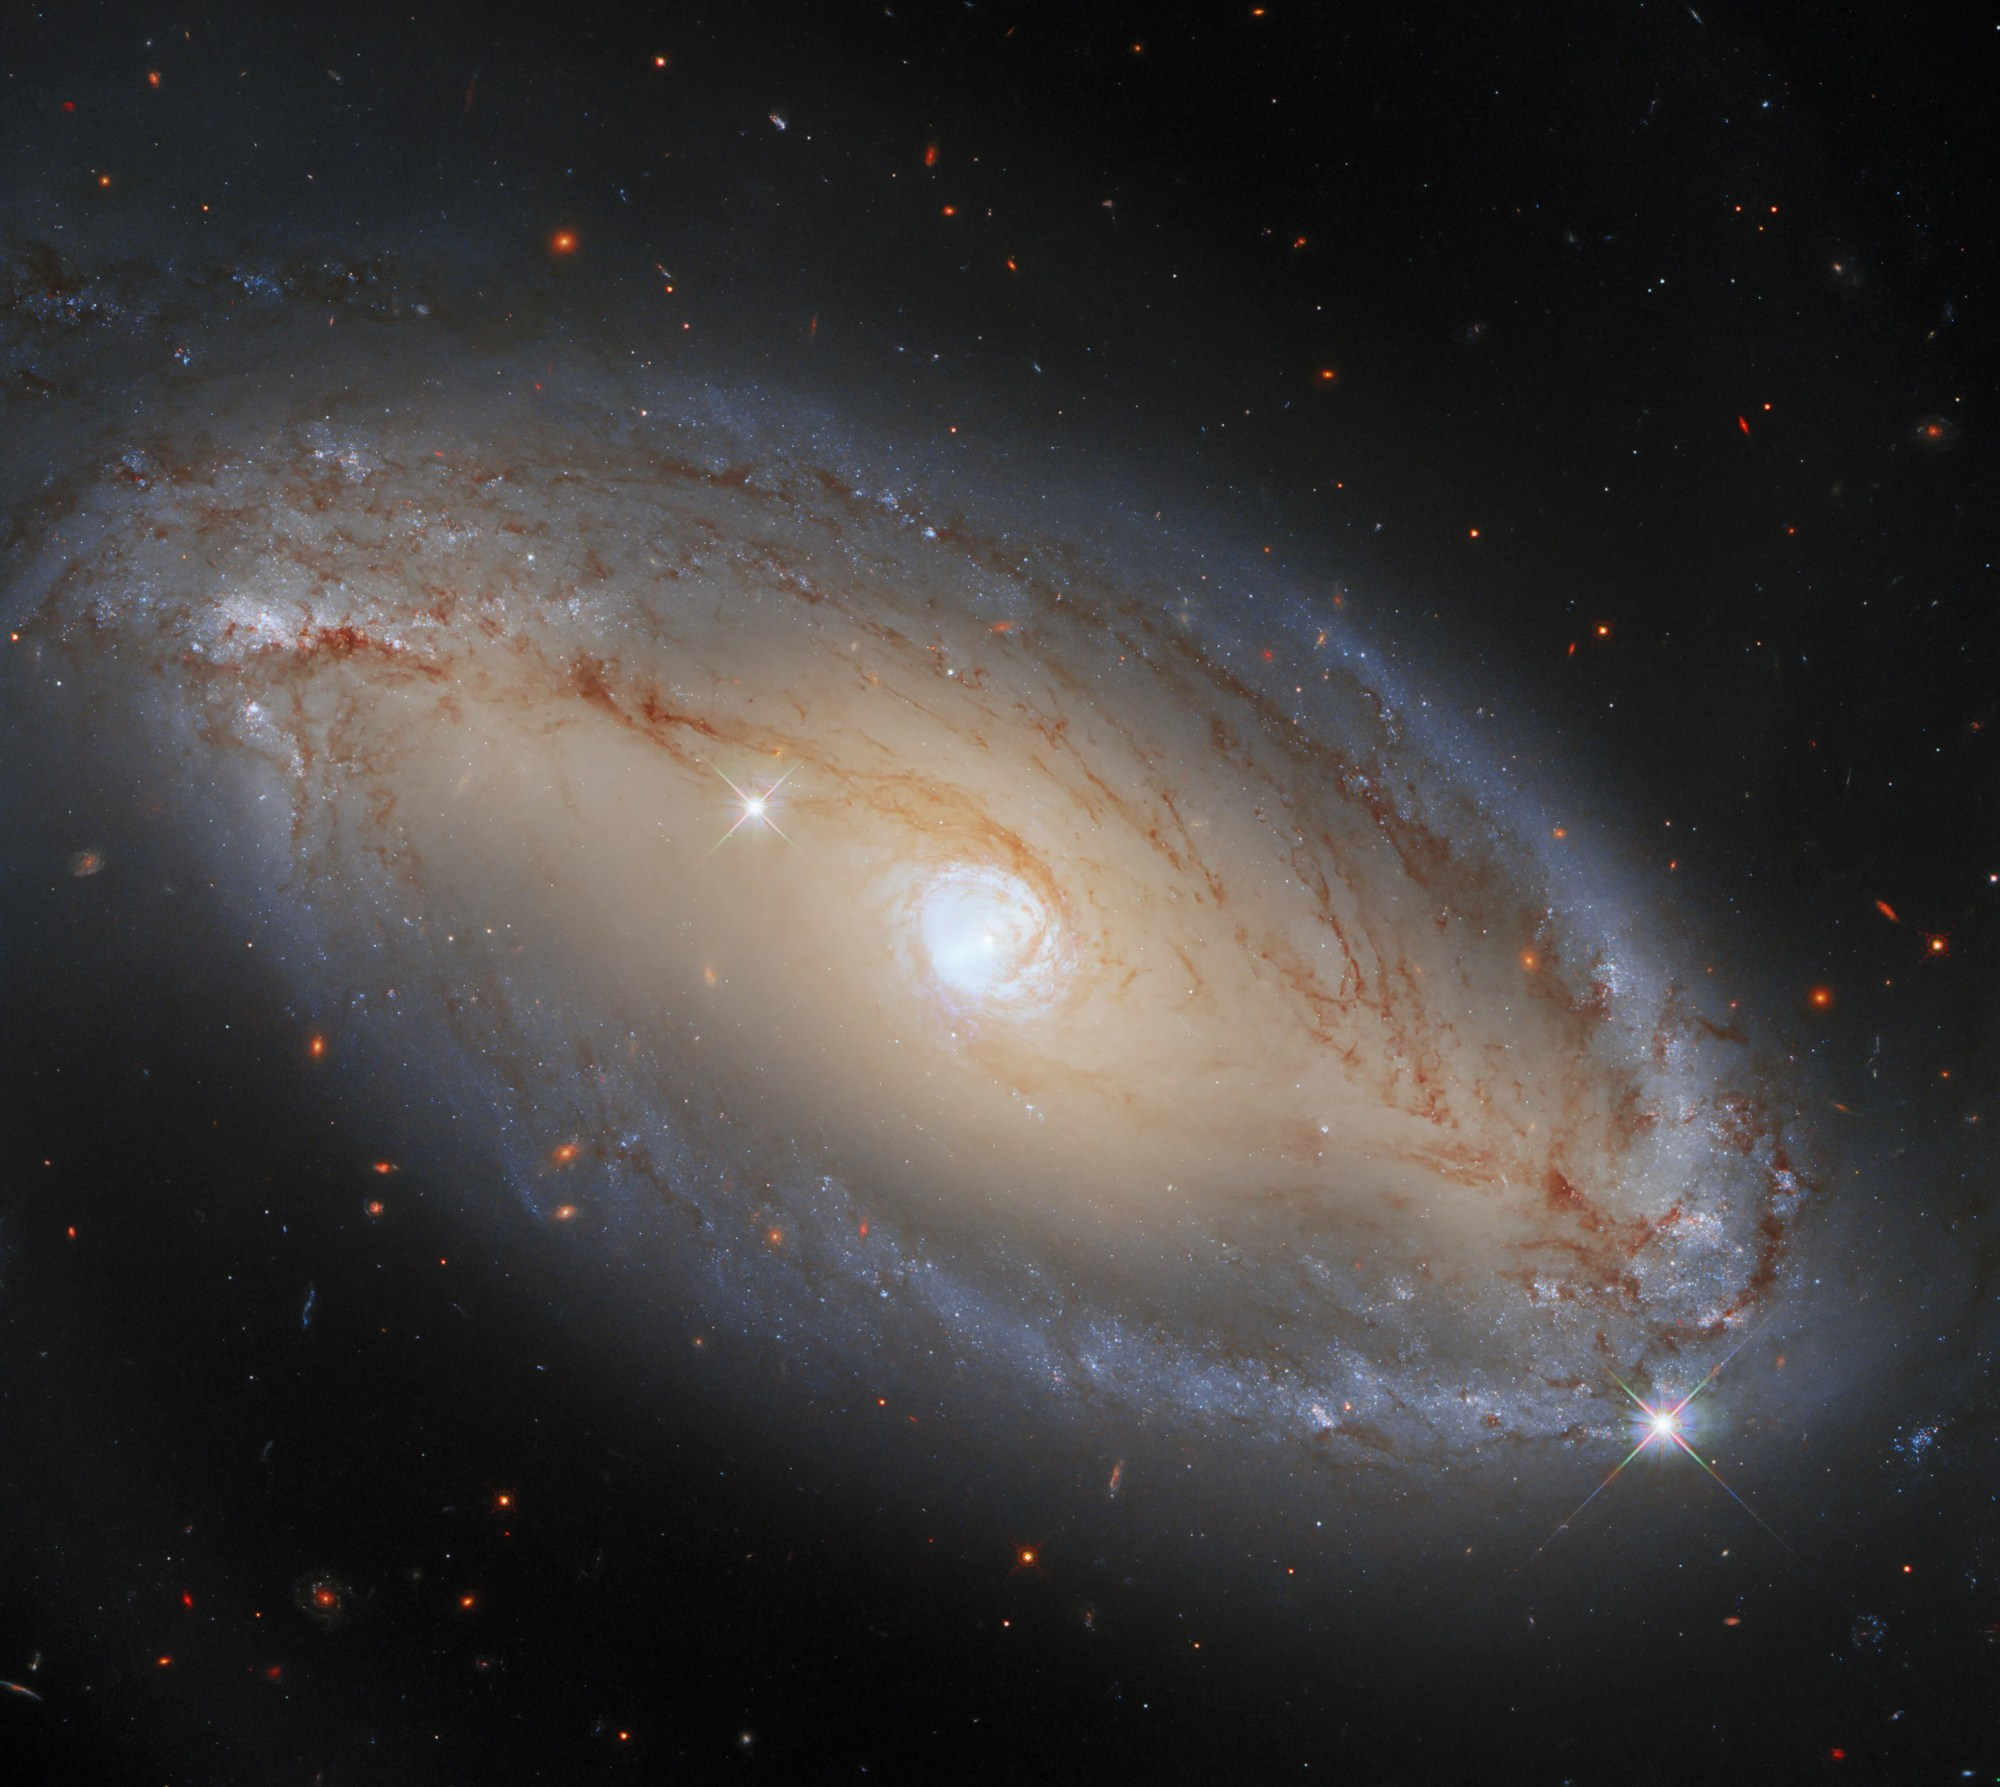 In this image, ncg 5728 appears to be an elegant, luminous, barred spiral galaxy.